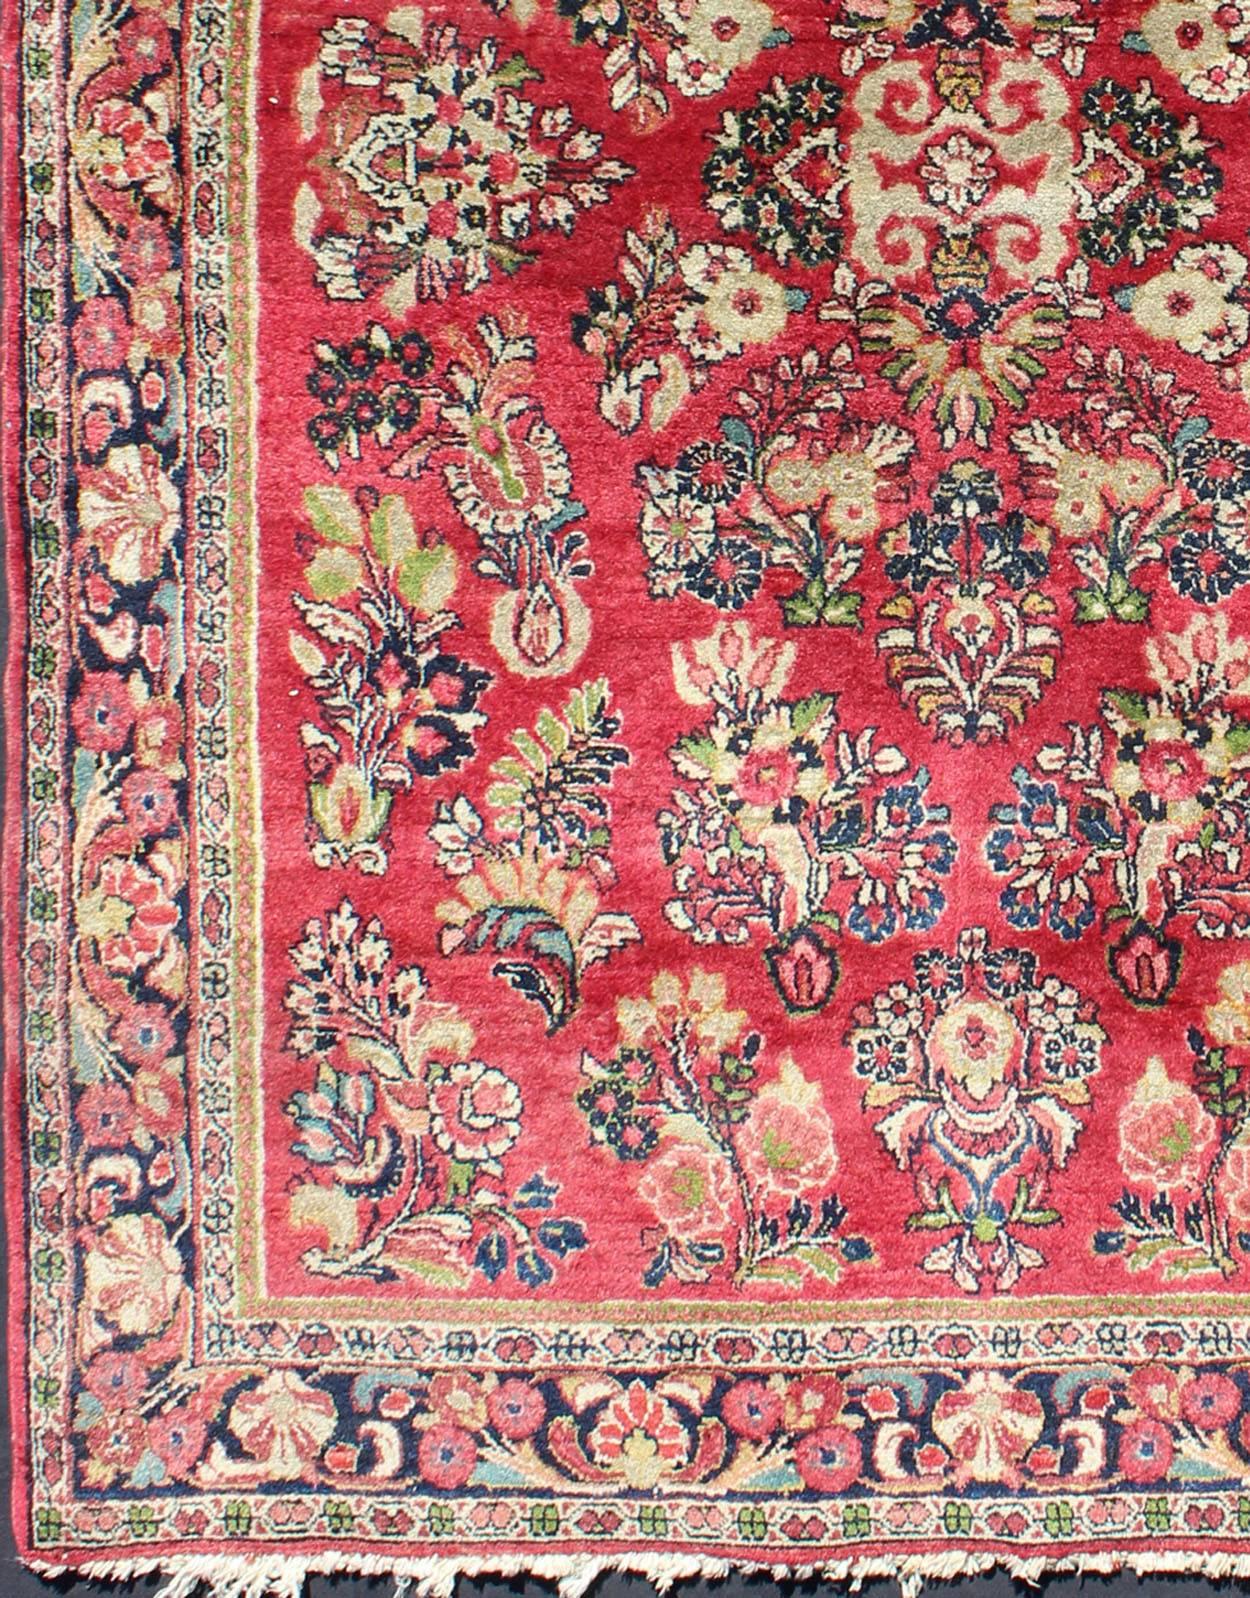 This piece is a wonderful, early 20th century Persian sarouk rug. A masterfully woven beautiful Red field of large tree branches and a myriad of floral varieties are woven in dark and light red, crimson and cream naturally dyed. The wide border